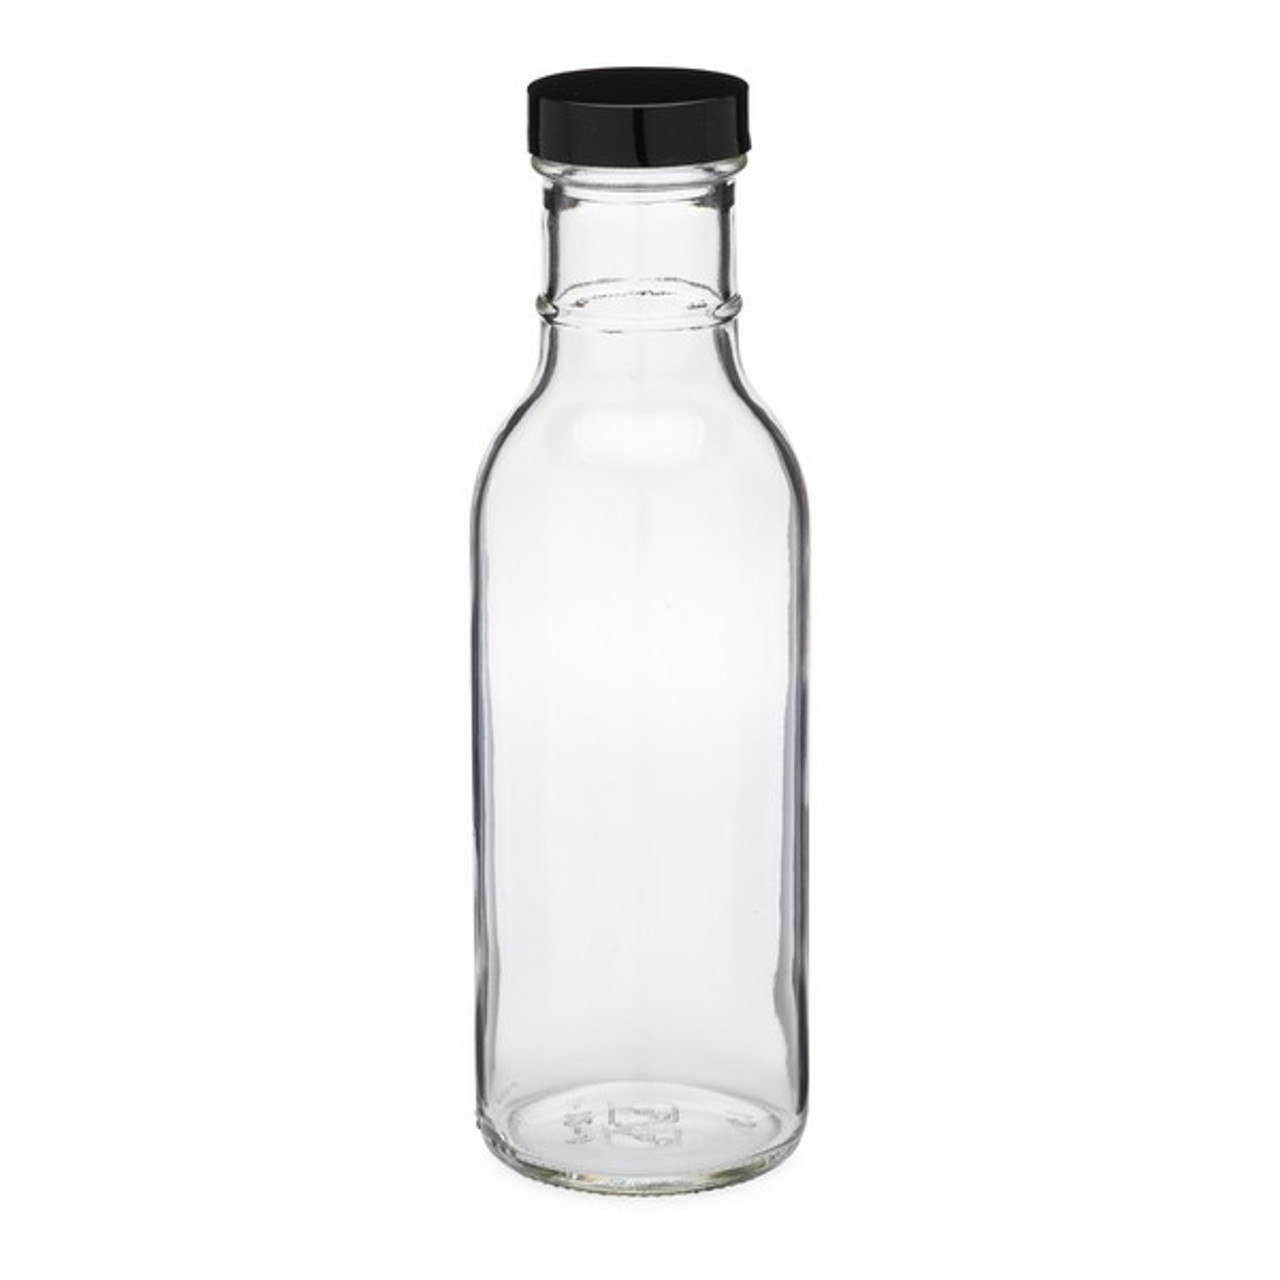 12 oz Clear Glass Ring Neck Bottles (White PP Cap) - 12/Case, Clear Type III 38-400